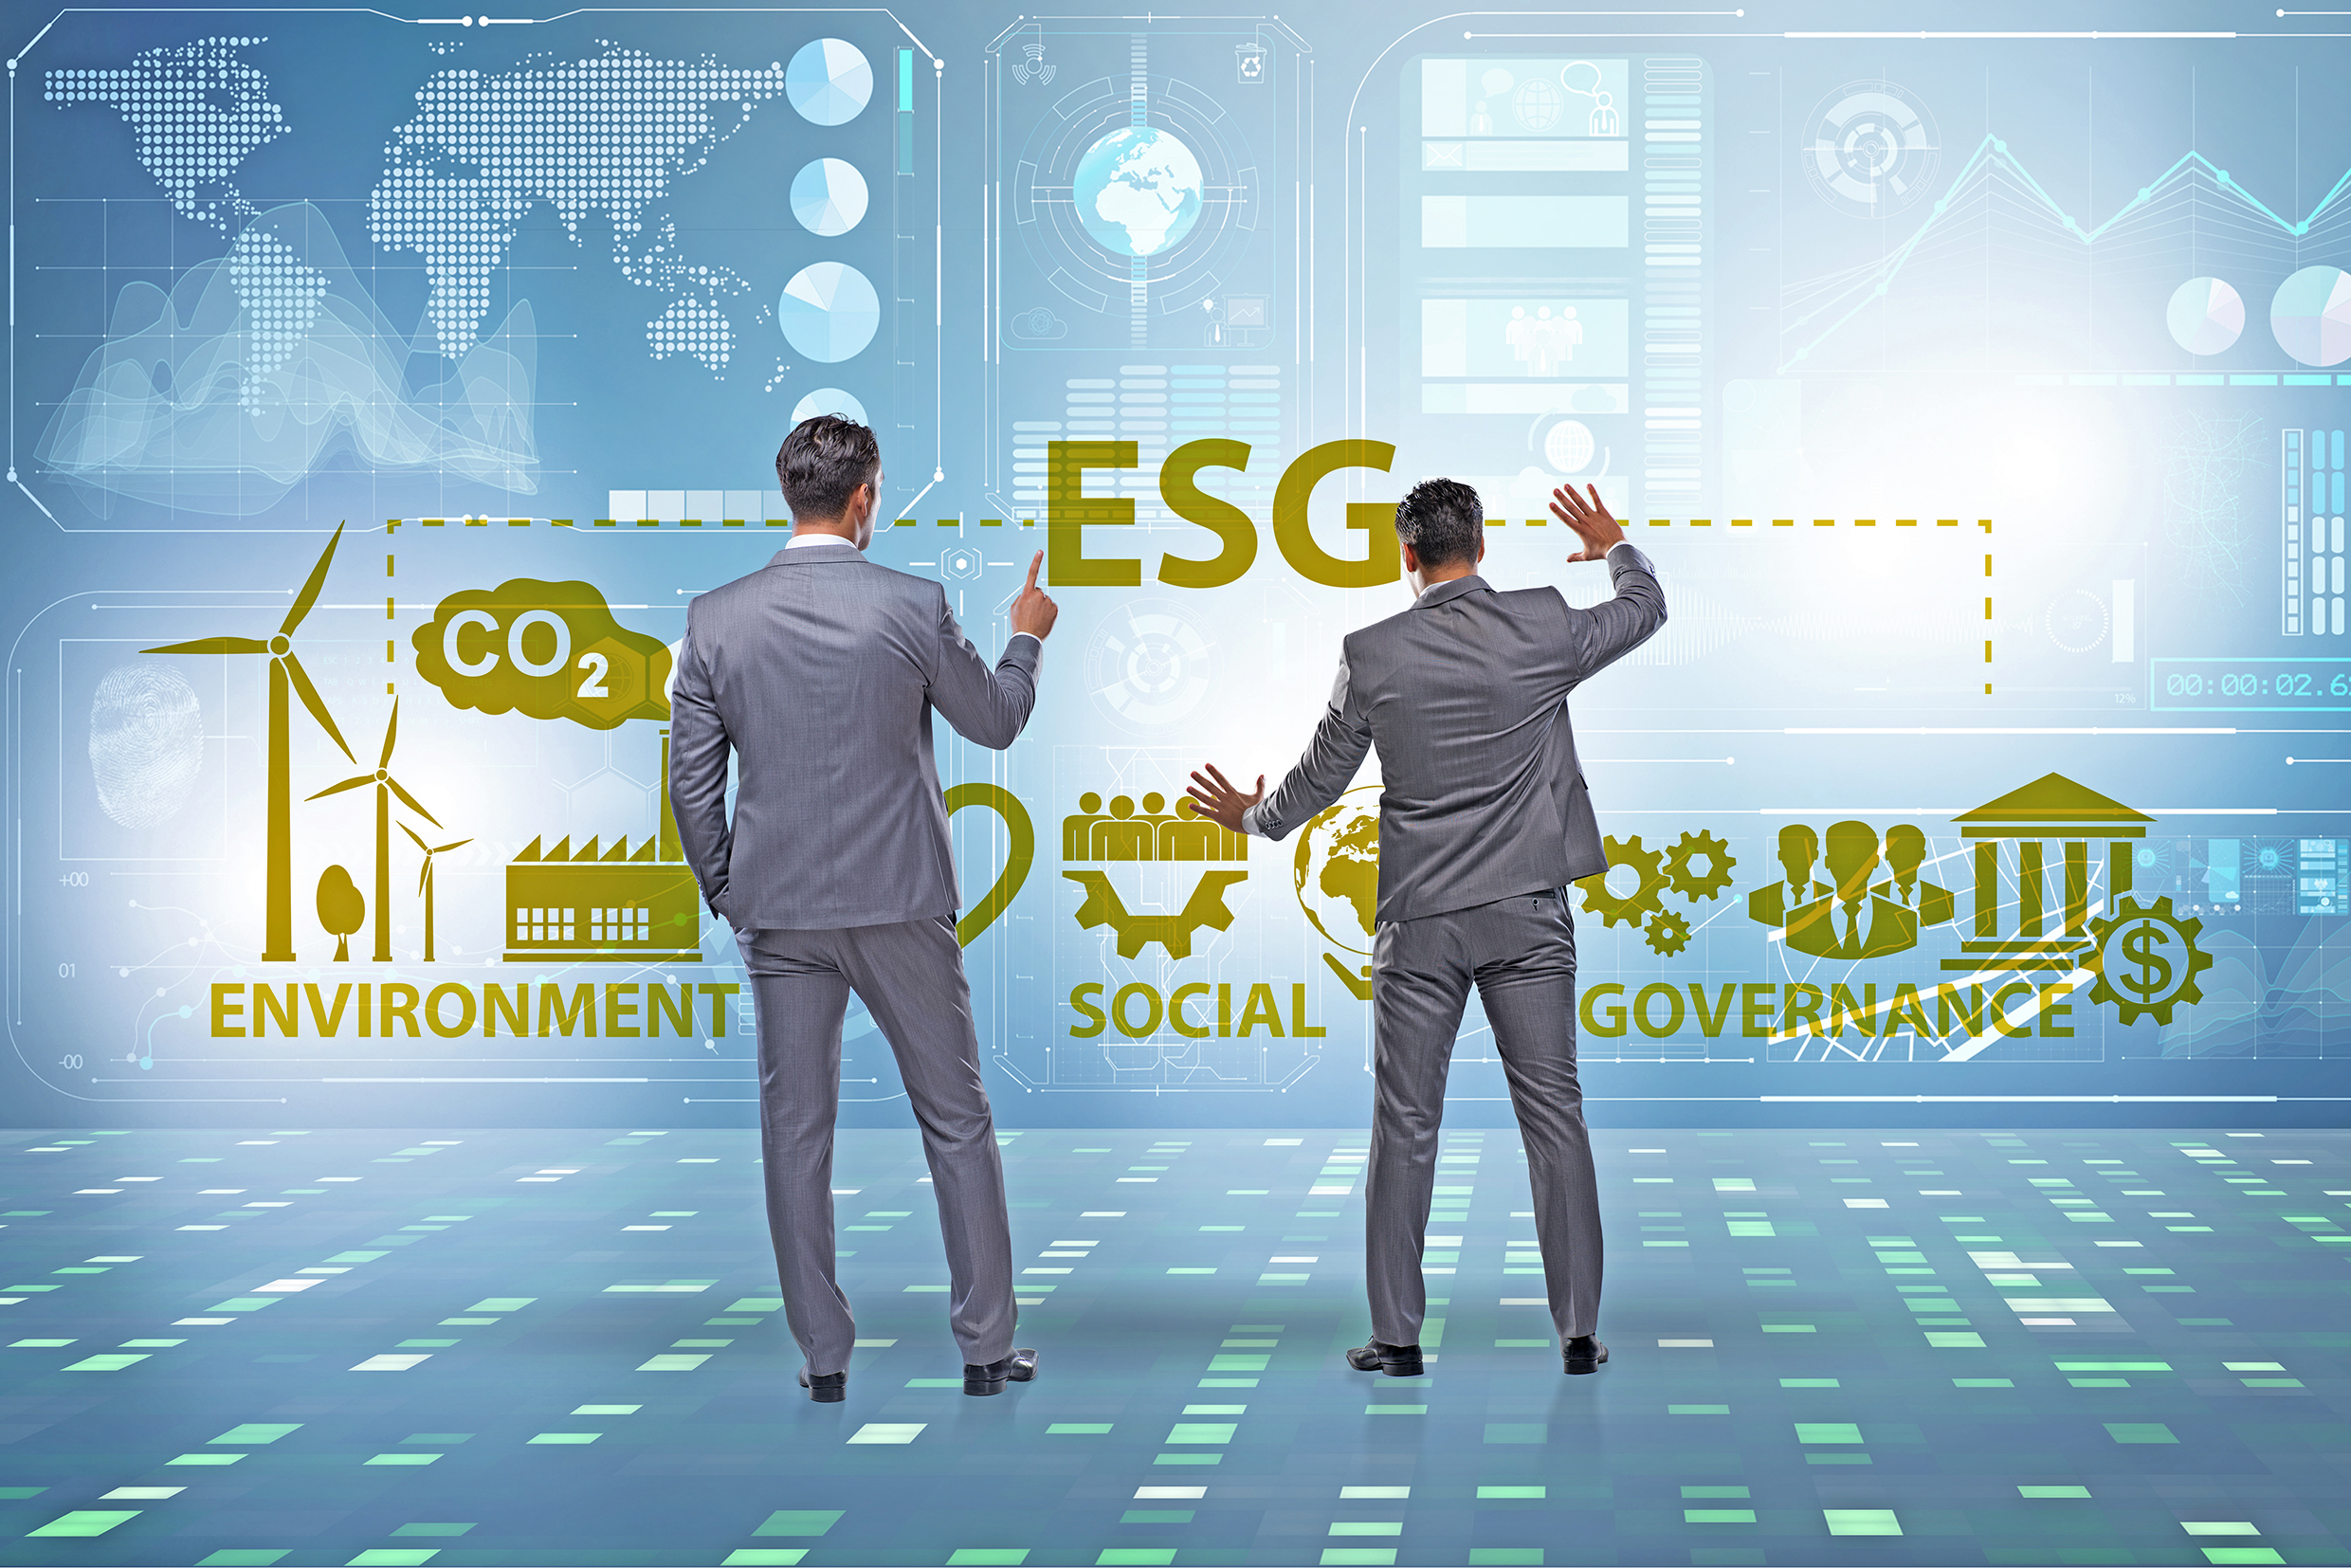 Market Talk: Questions Around Supply and Demand but ESG Grow...